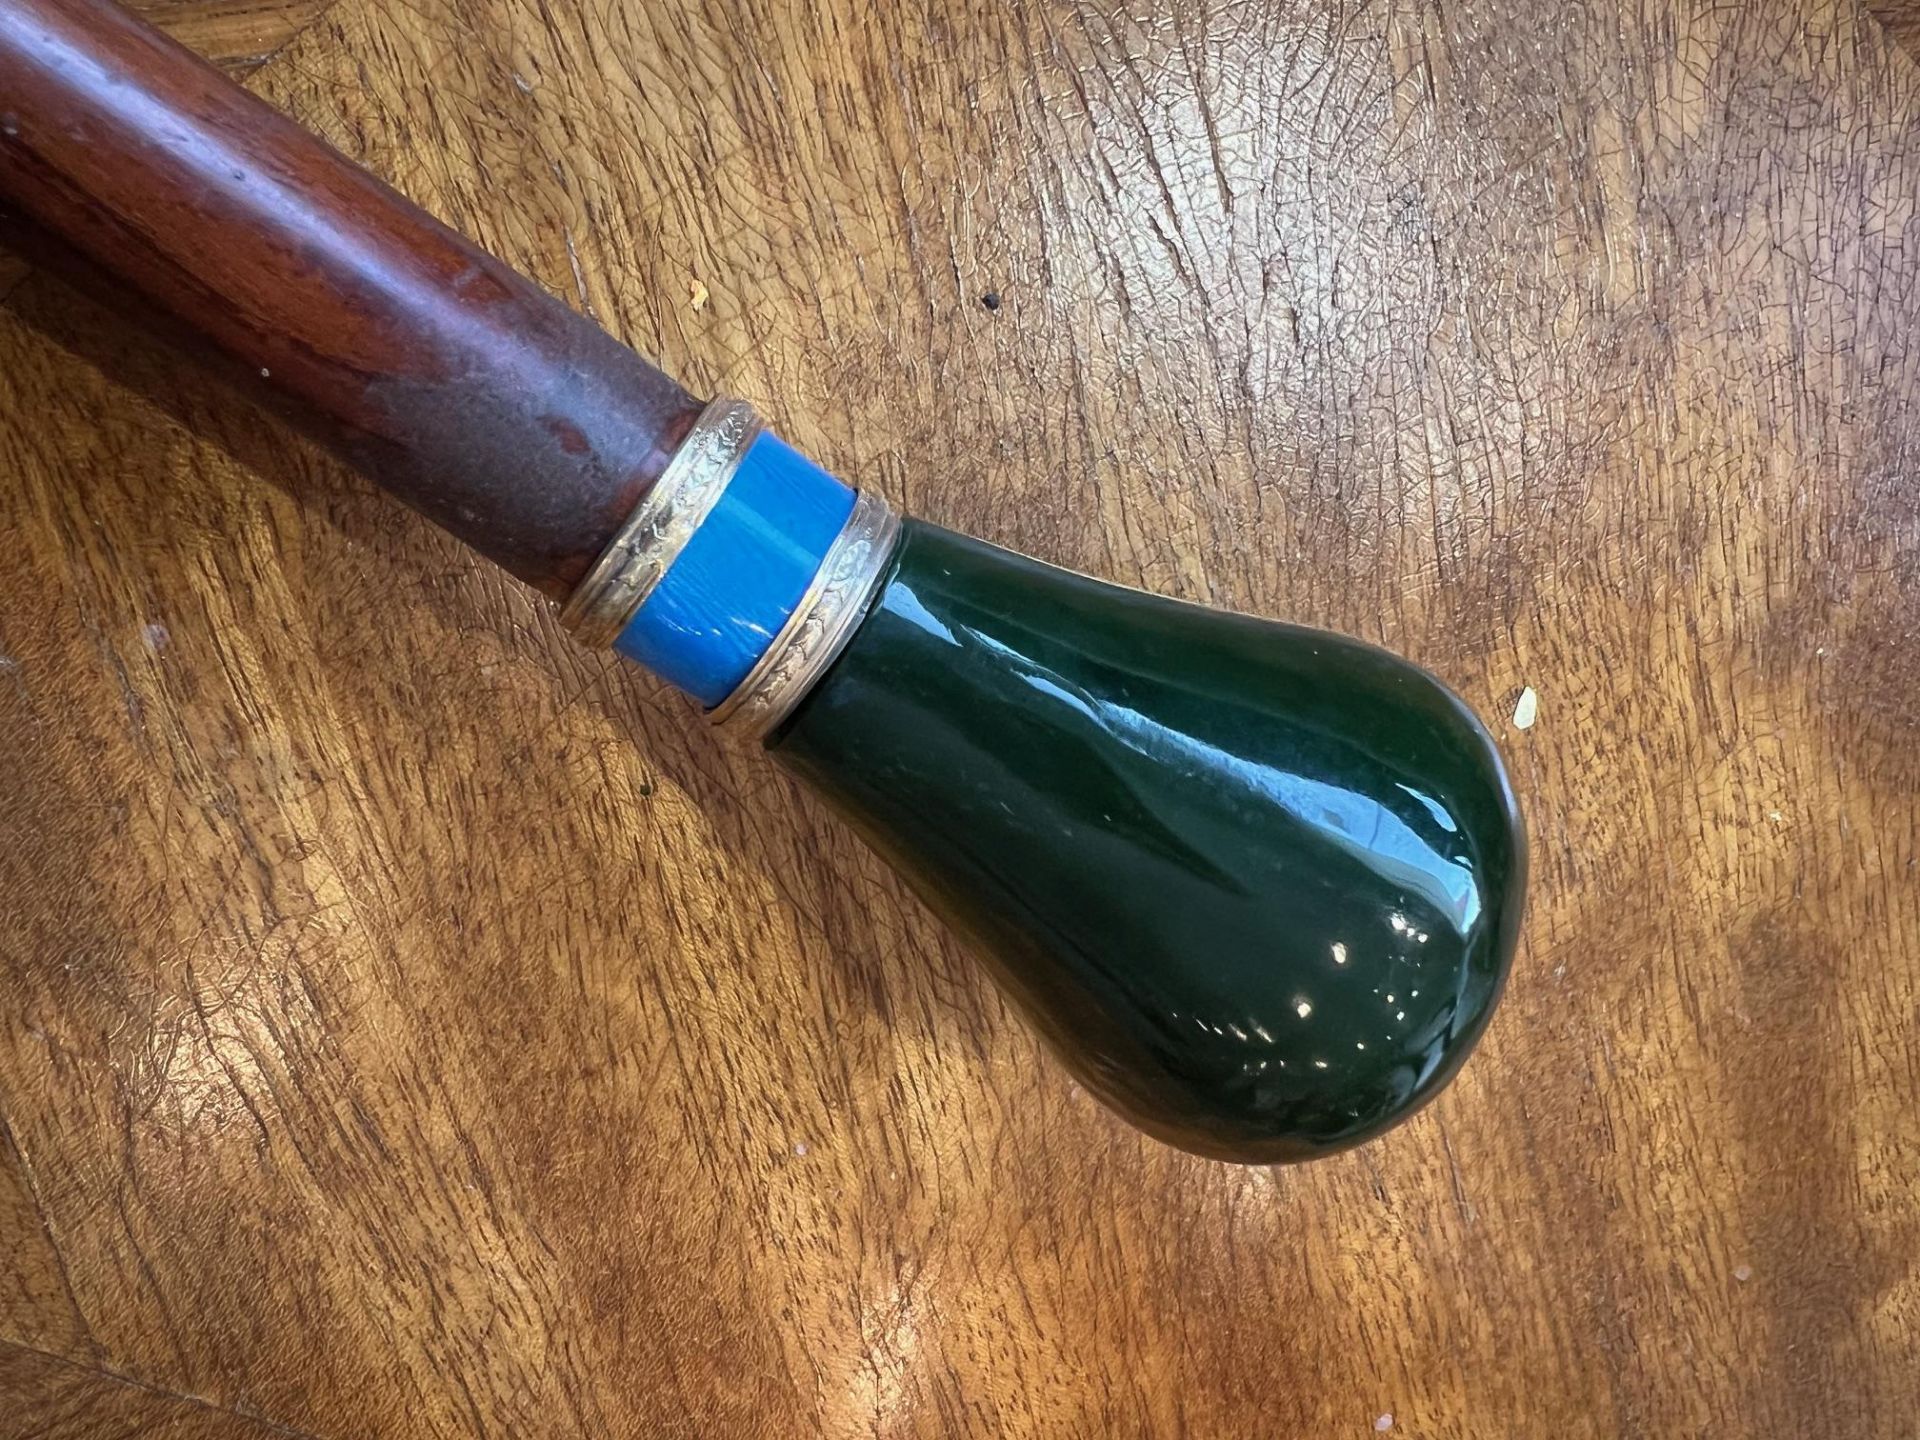 A FABERGE STYLE SILVER GILT, NEPHRITE JADE AND ENAMEL WALKING CANE - Image 6 of 8